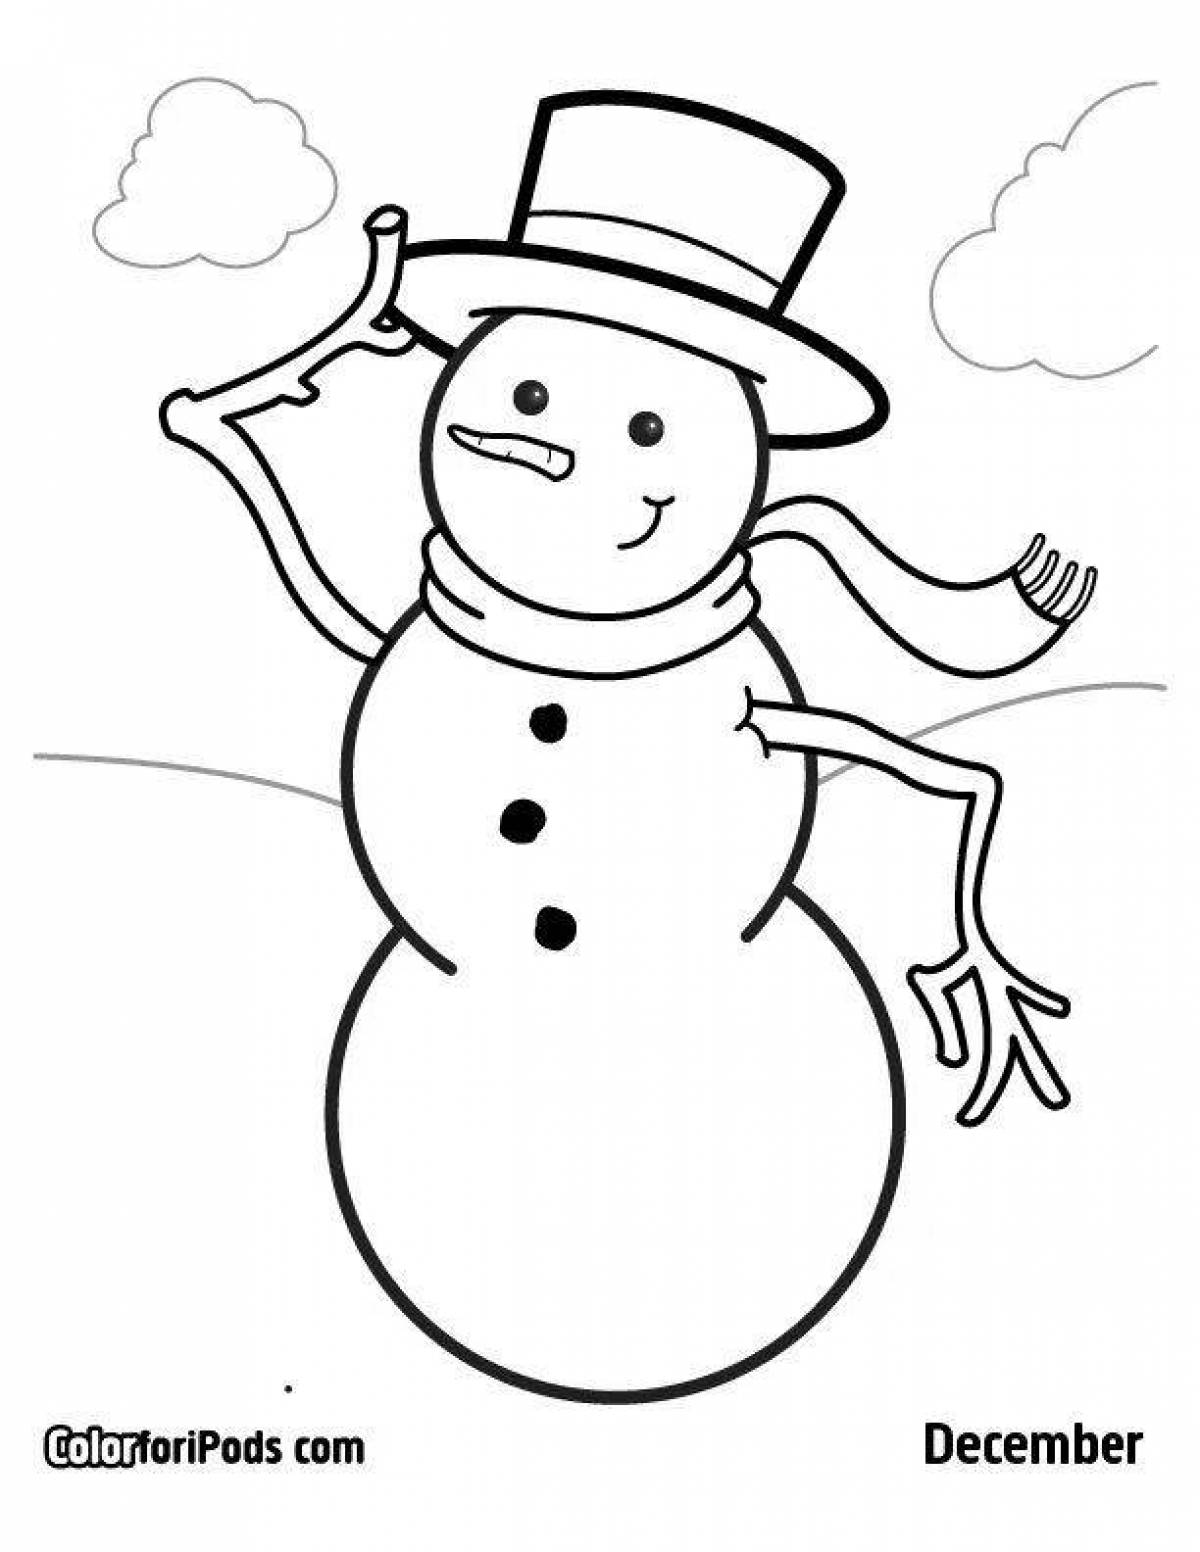 Colour-loving snowman coloring book for children 2-3 years old